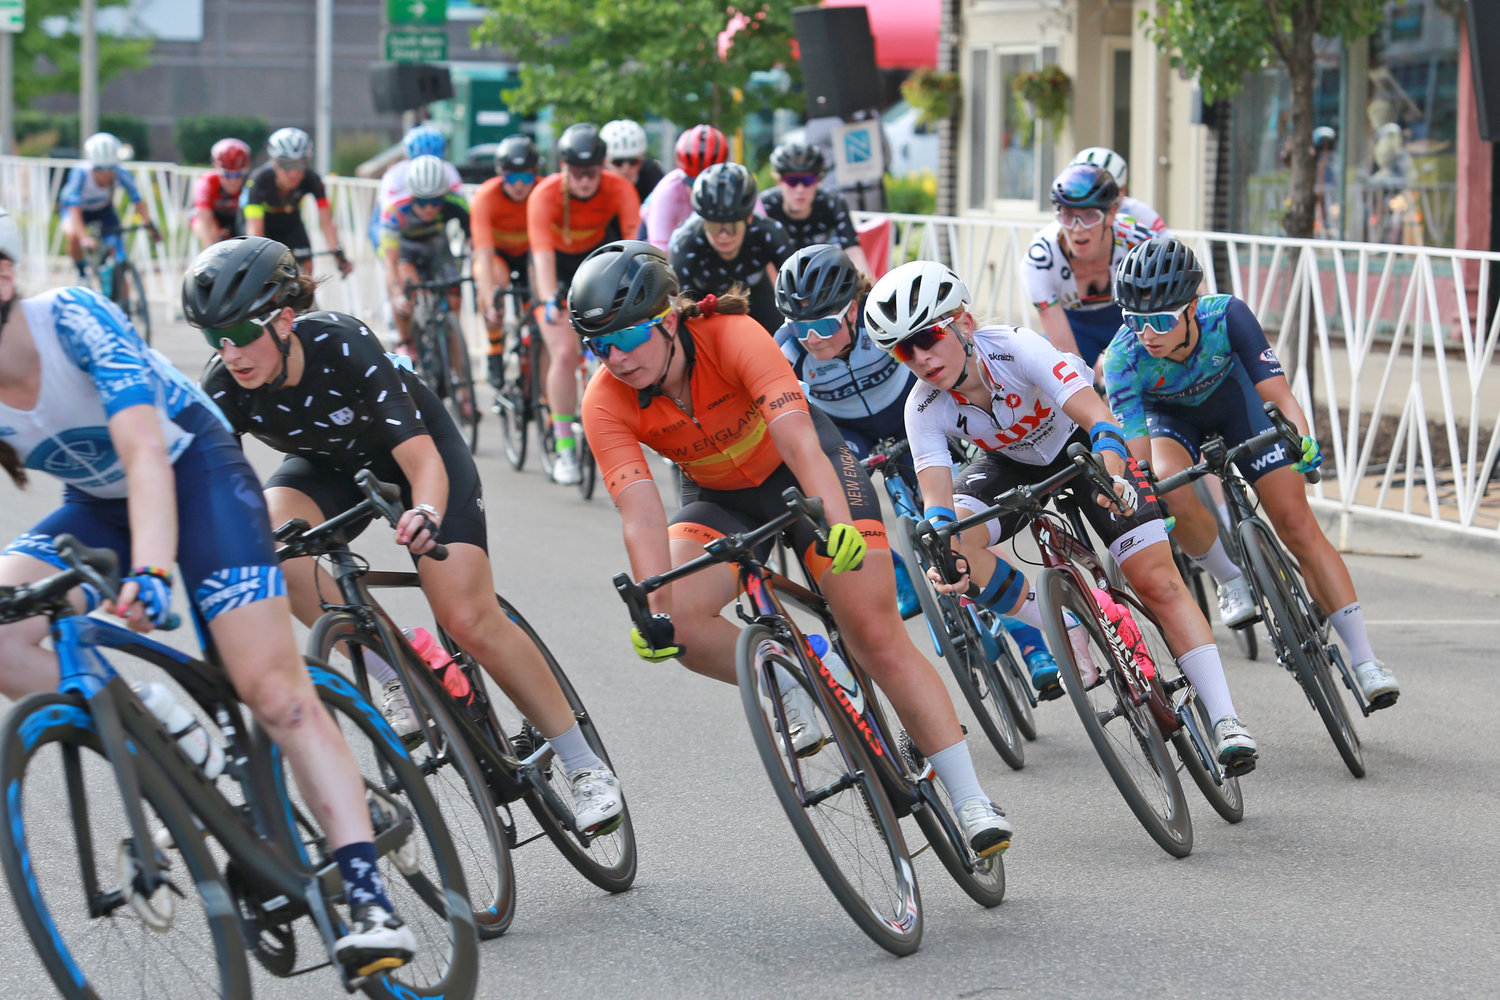 Alijah Beatty rounds a bend during the Janesville Town Square Grand Prix.